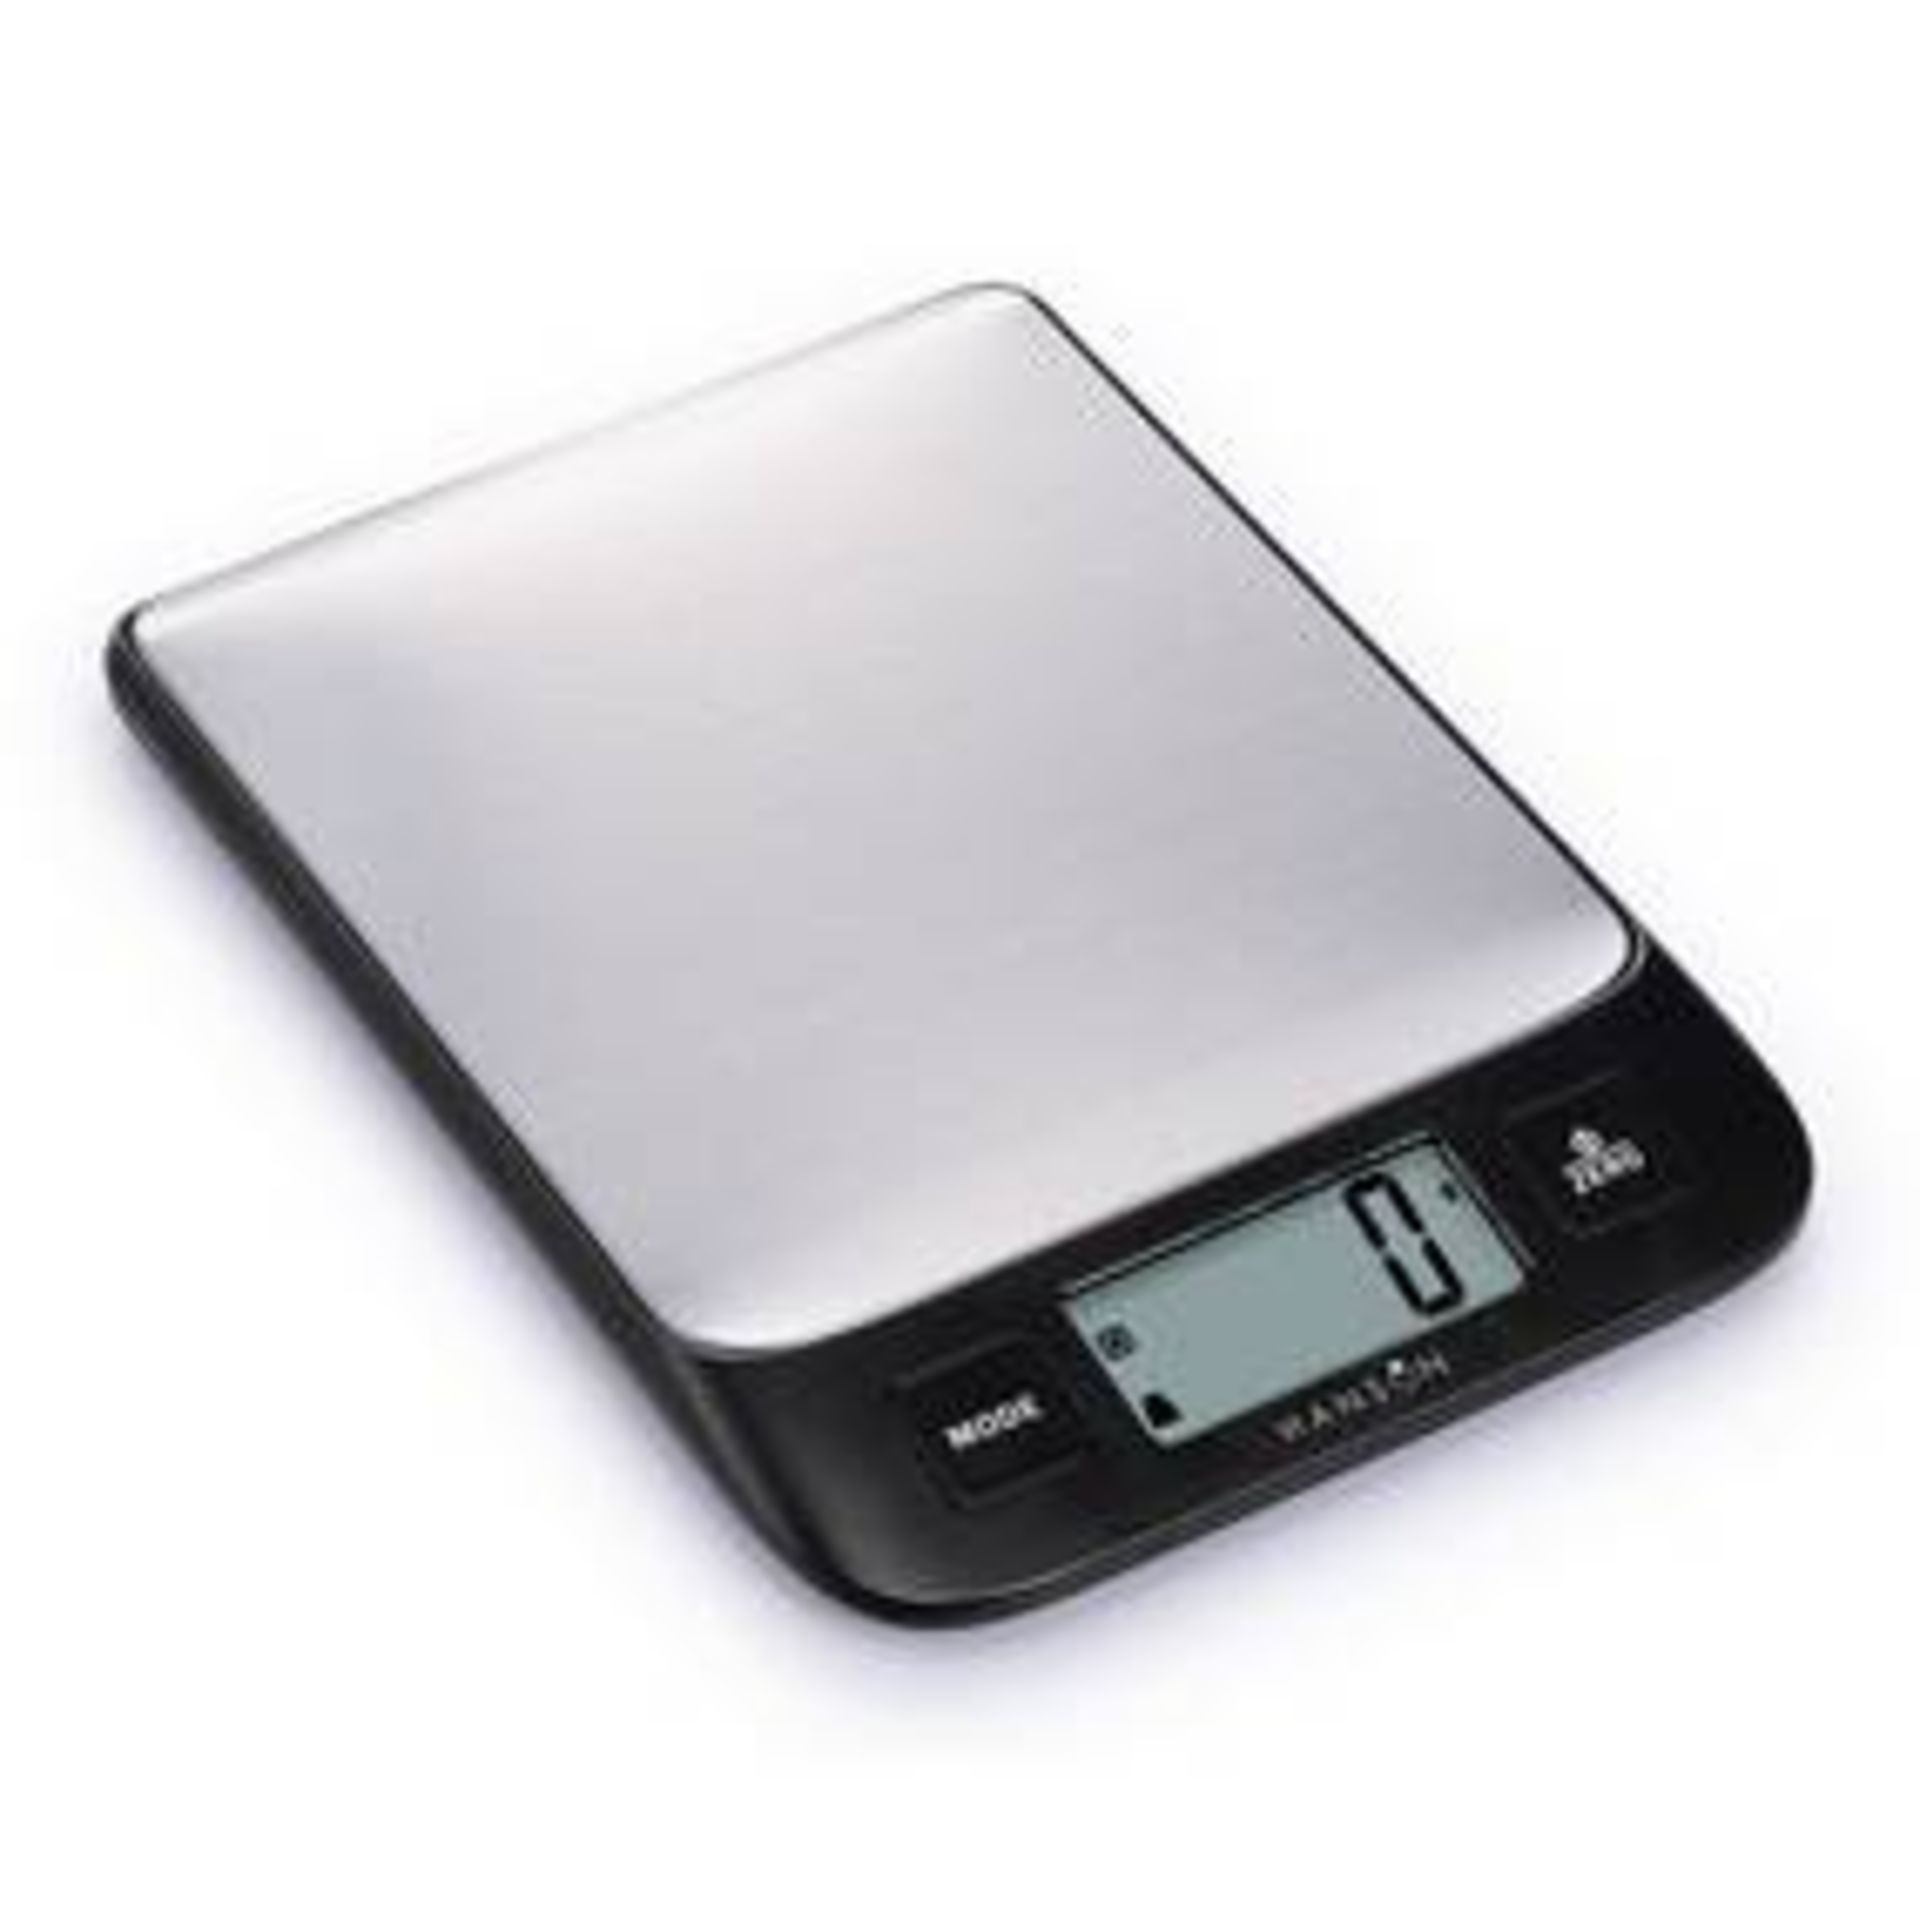 V Brand New Digital Kitchen Scales With Large LCD Display In Ibs Ozs & Grams (Styles May Vary &